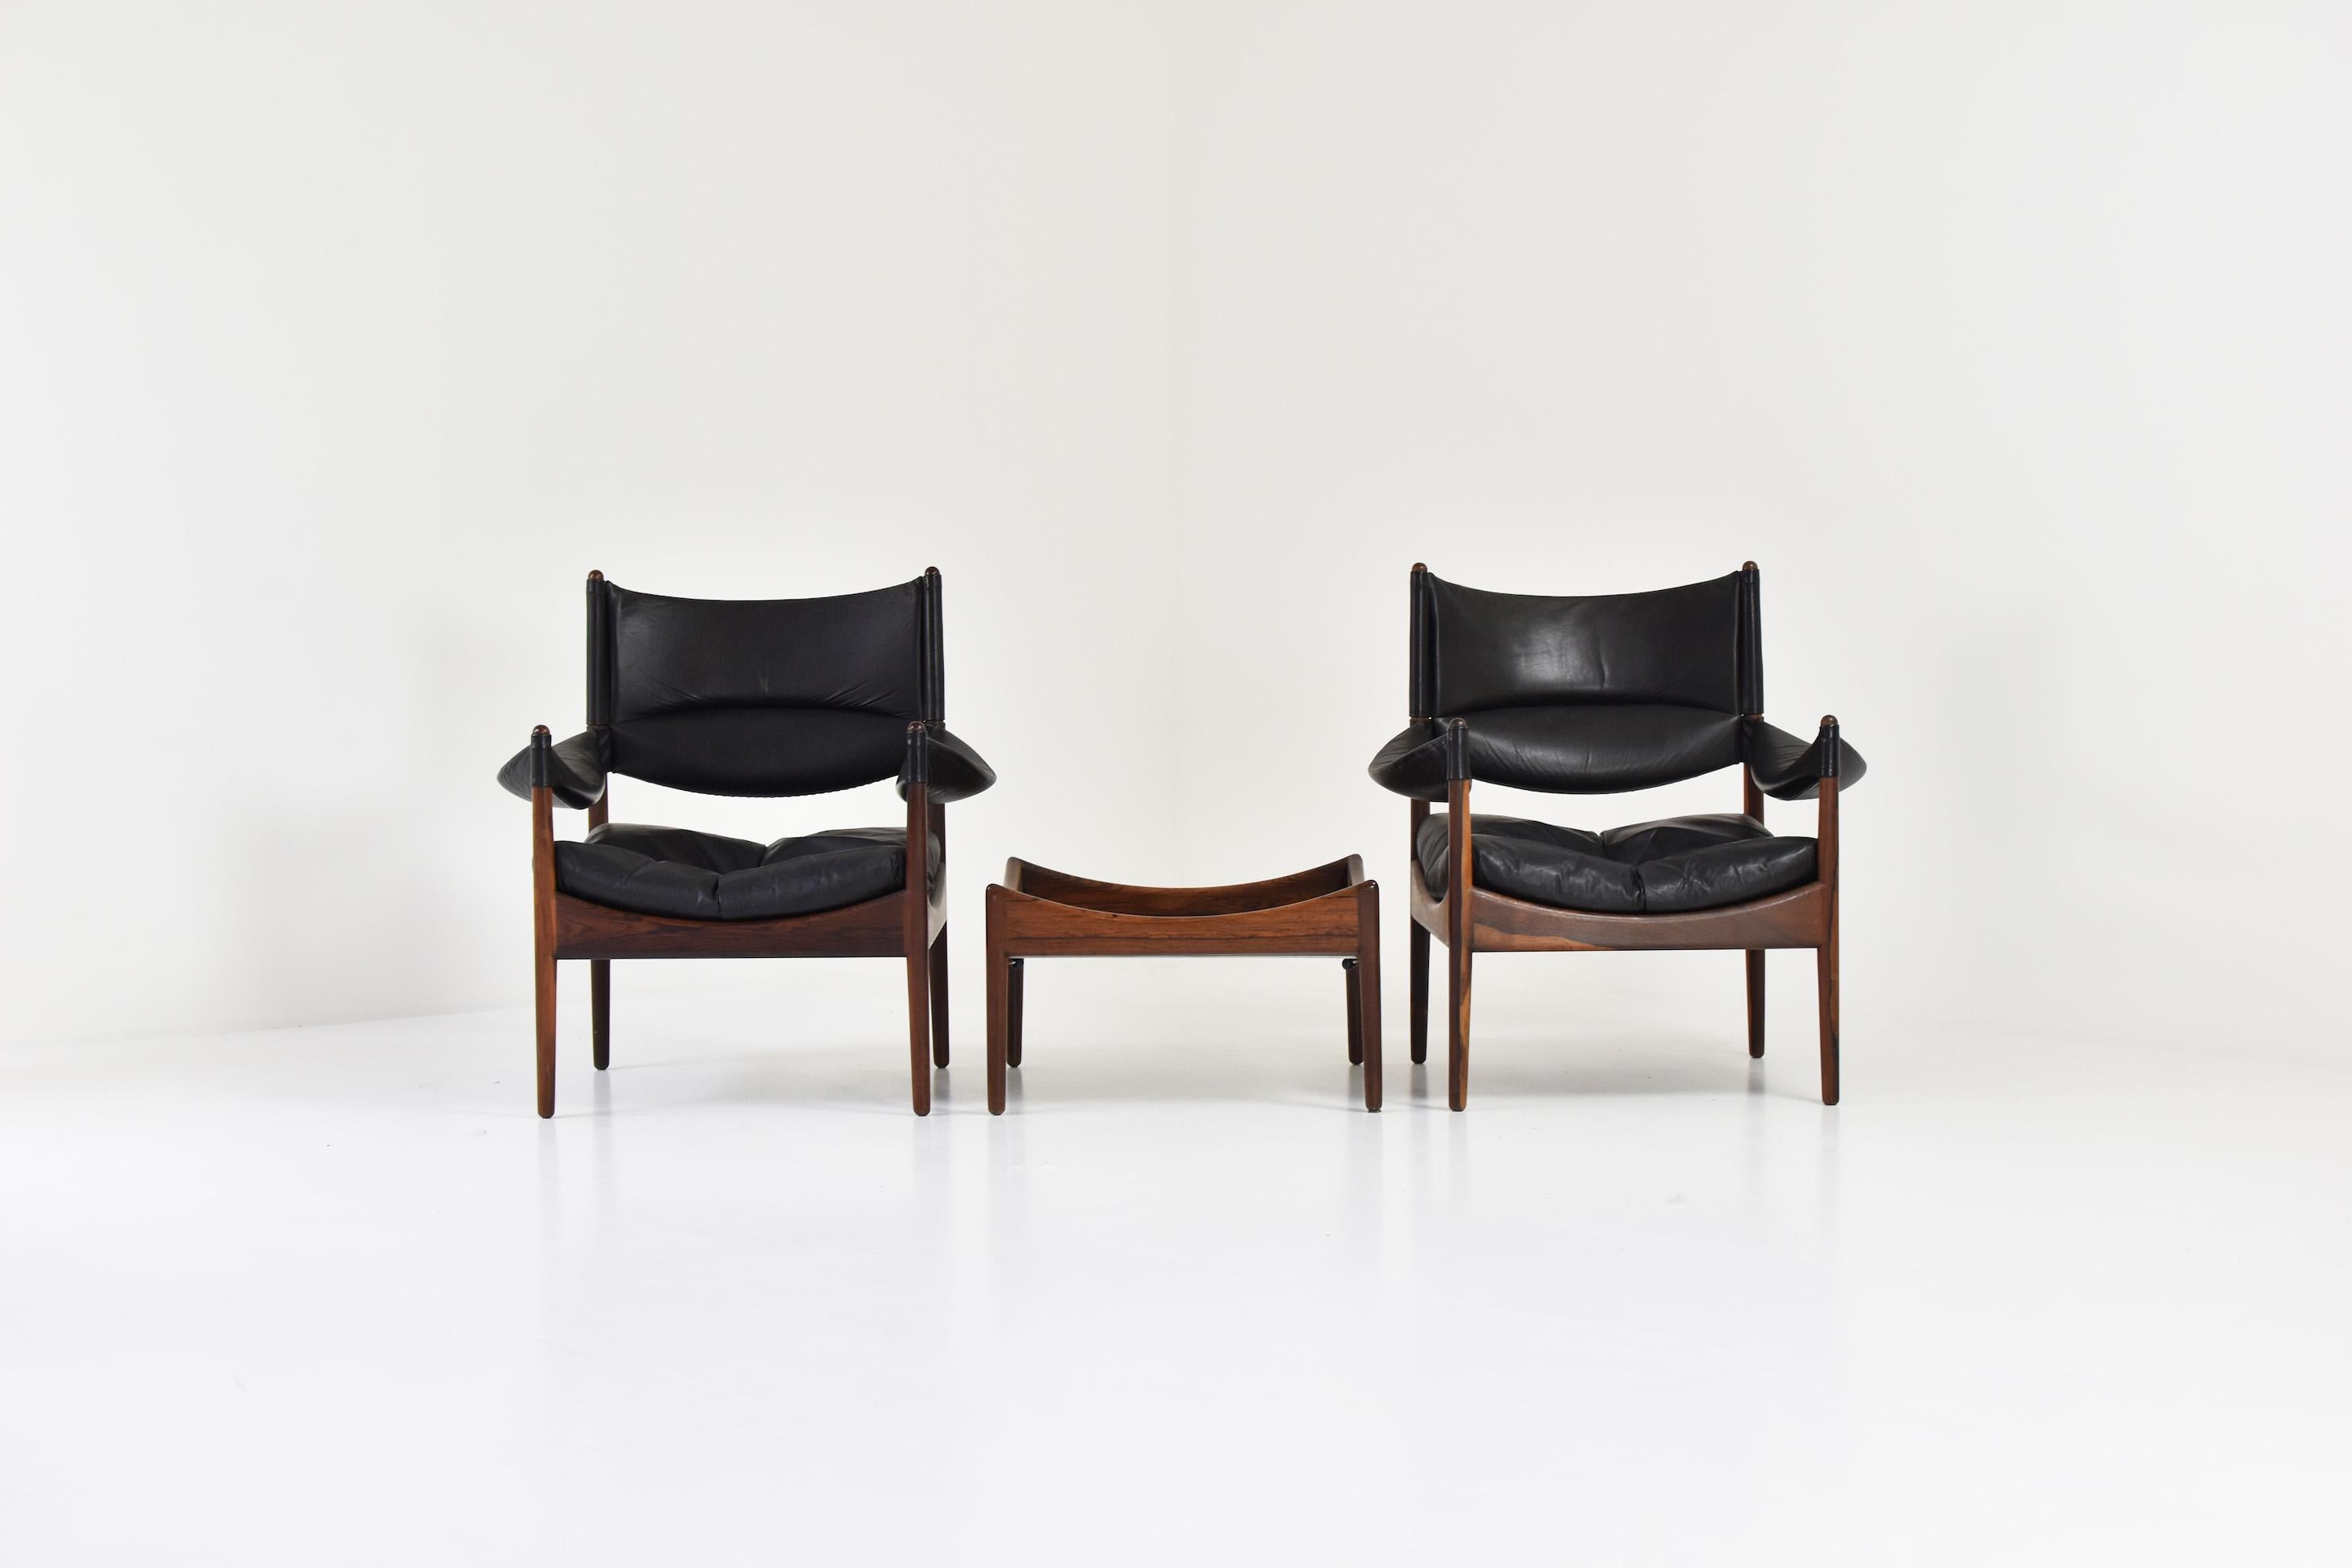 Rare ‘Modus’ seating group by Kristian Vedel for Søren Willadsen Møbelfabrik, Denmark, 1963. This set features two easy chairs with its matching ottoman and side table. All made out of solid rosewood and the original black leather upholstery.